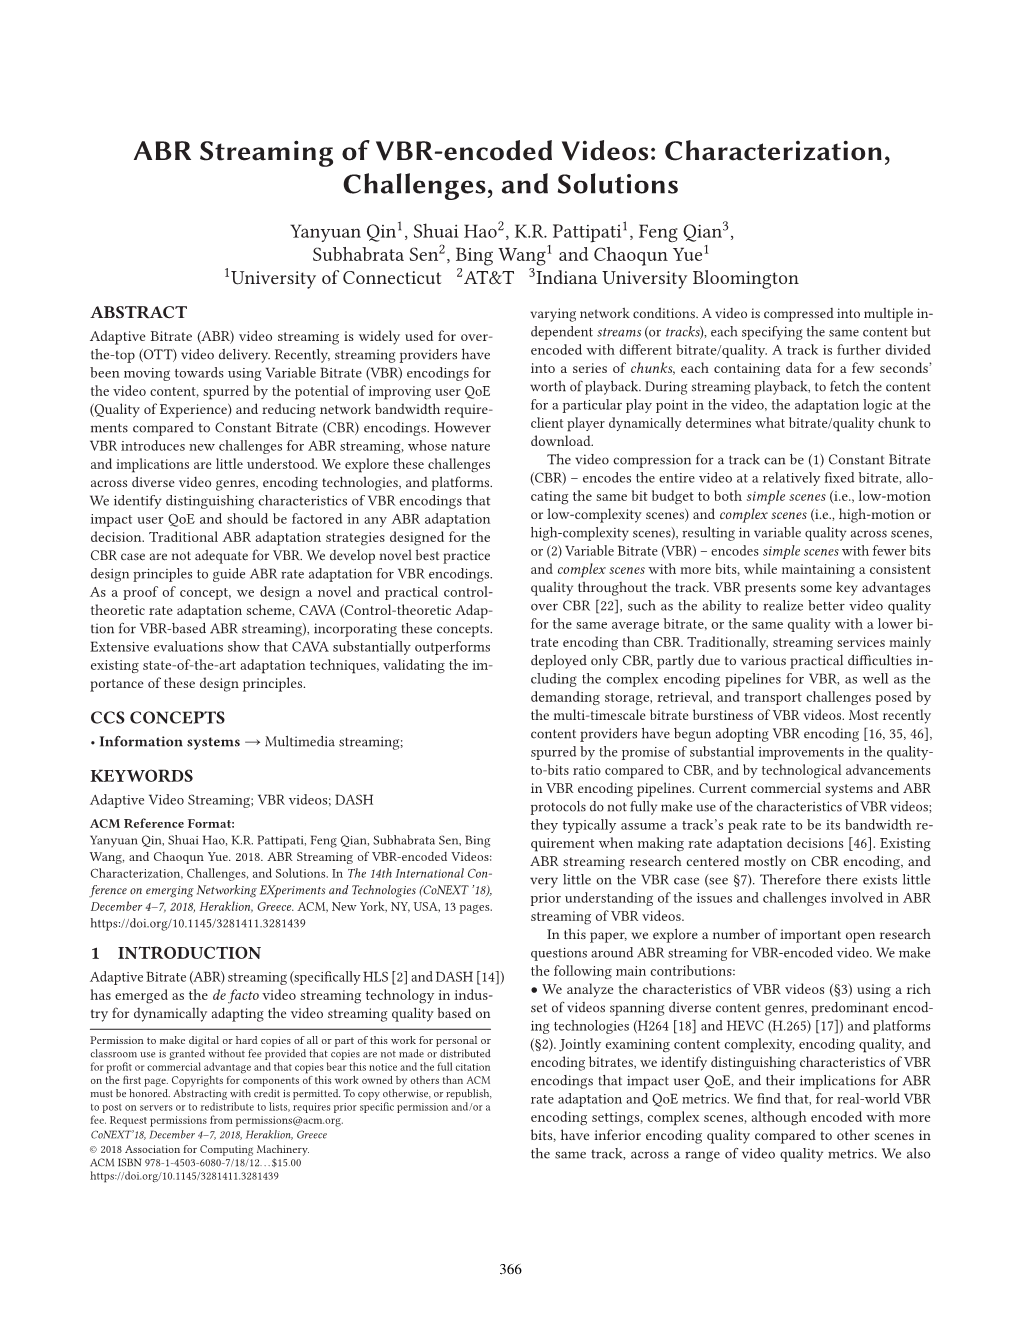 ABR Streaming of VBR-Encoded Videos: Characterization, Challenges, and Solutions